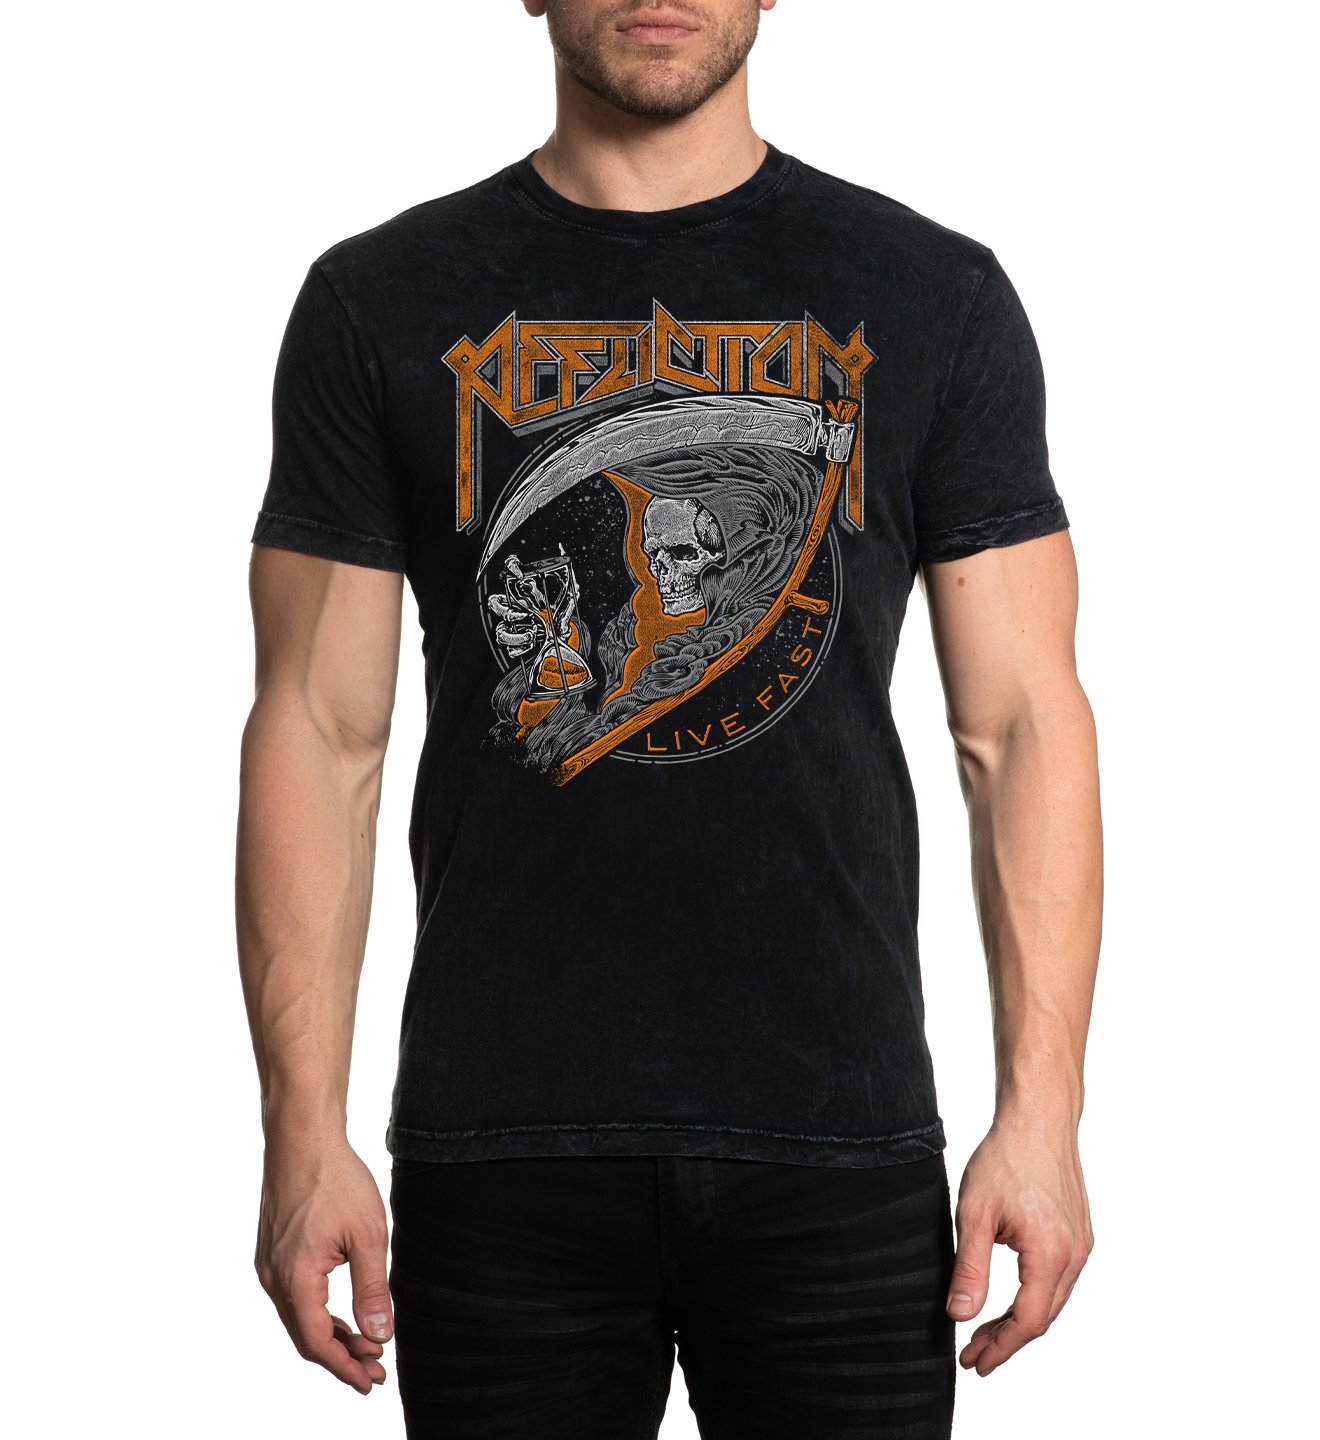 Eleventh Hour - Mens Short Sleeve Tees - Affliction Clothing